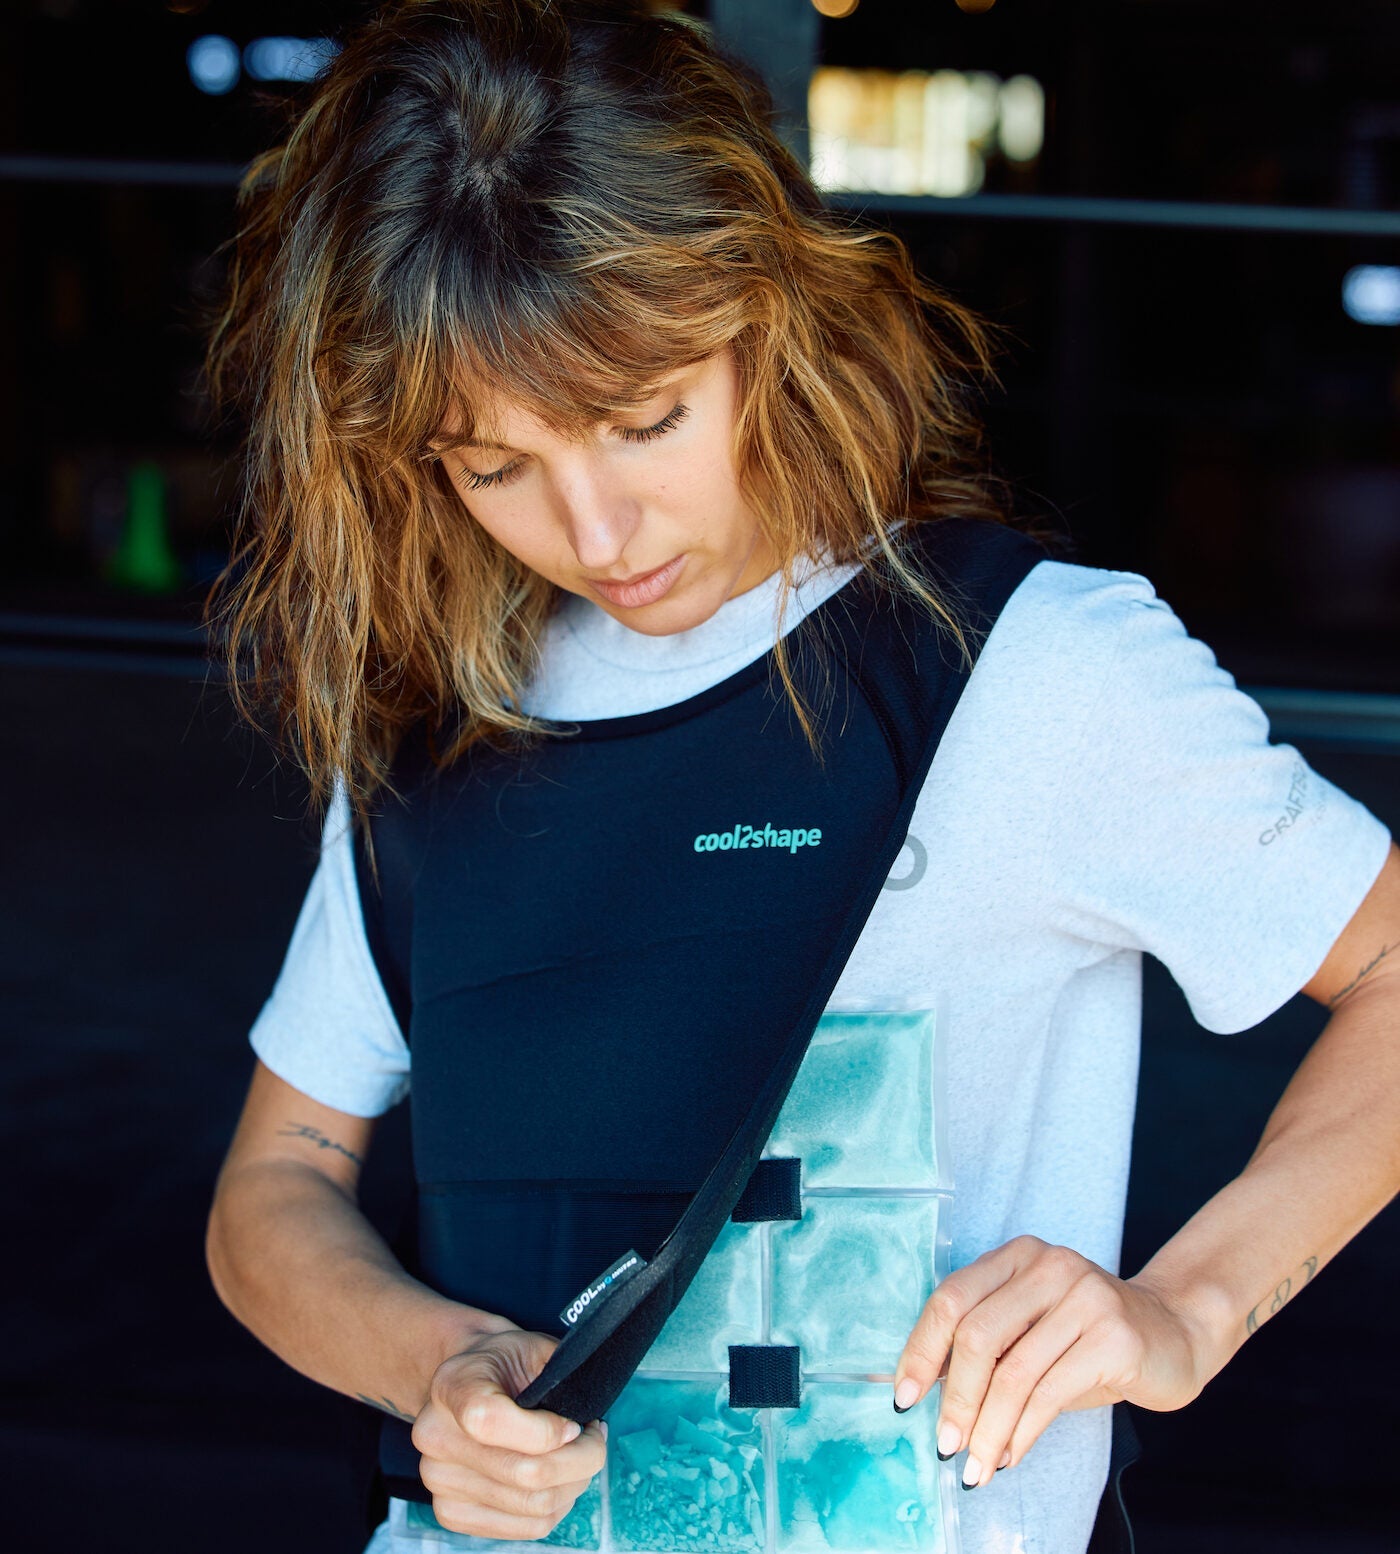 A Guide for Neoprene Products (How to extend the longevity of the